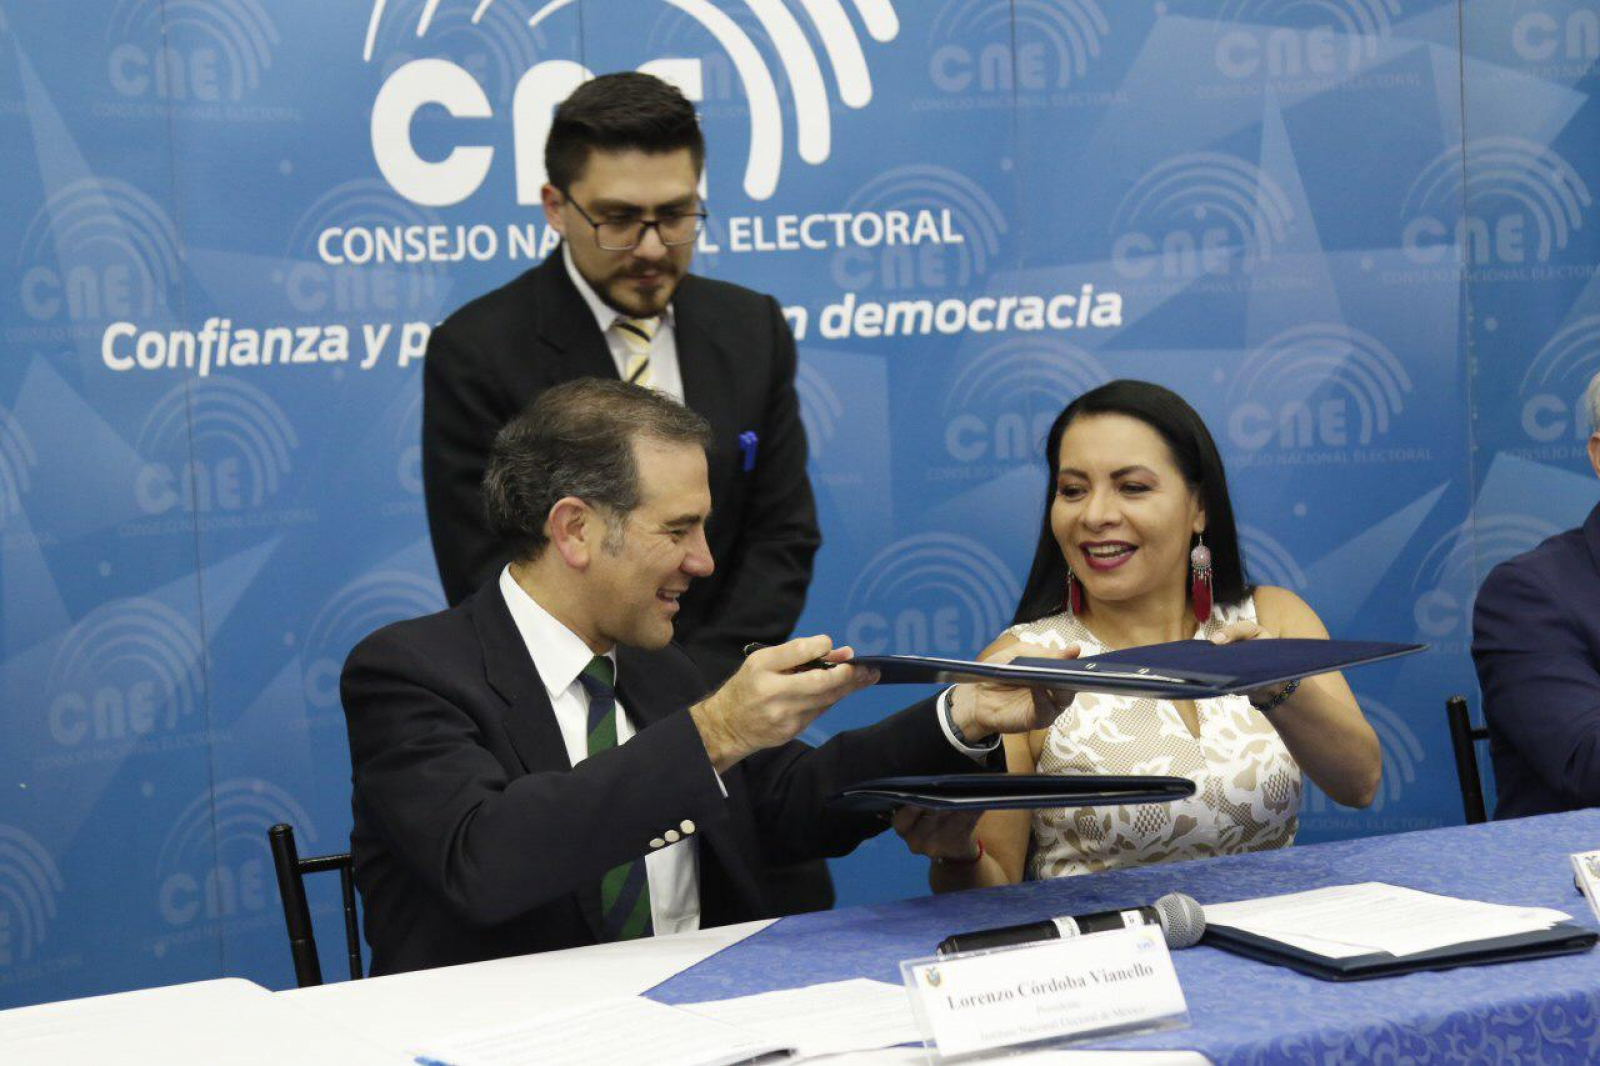 Countering Disinformation: NDI Collaborates with the Electoral Council in Ecuador